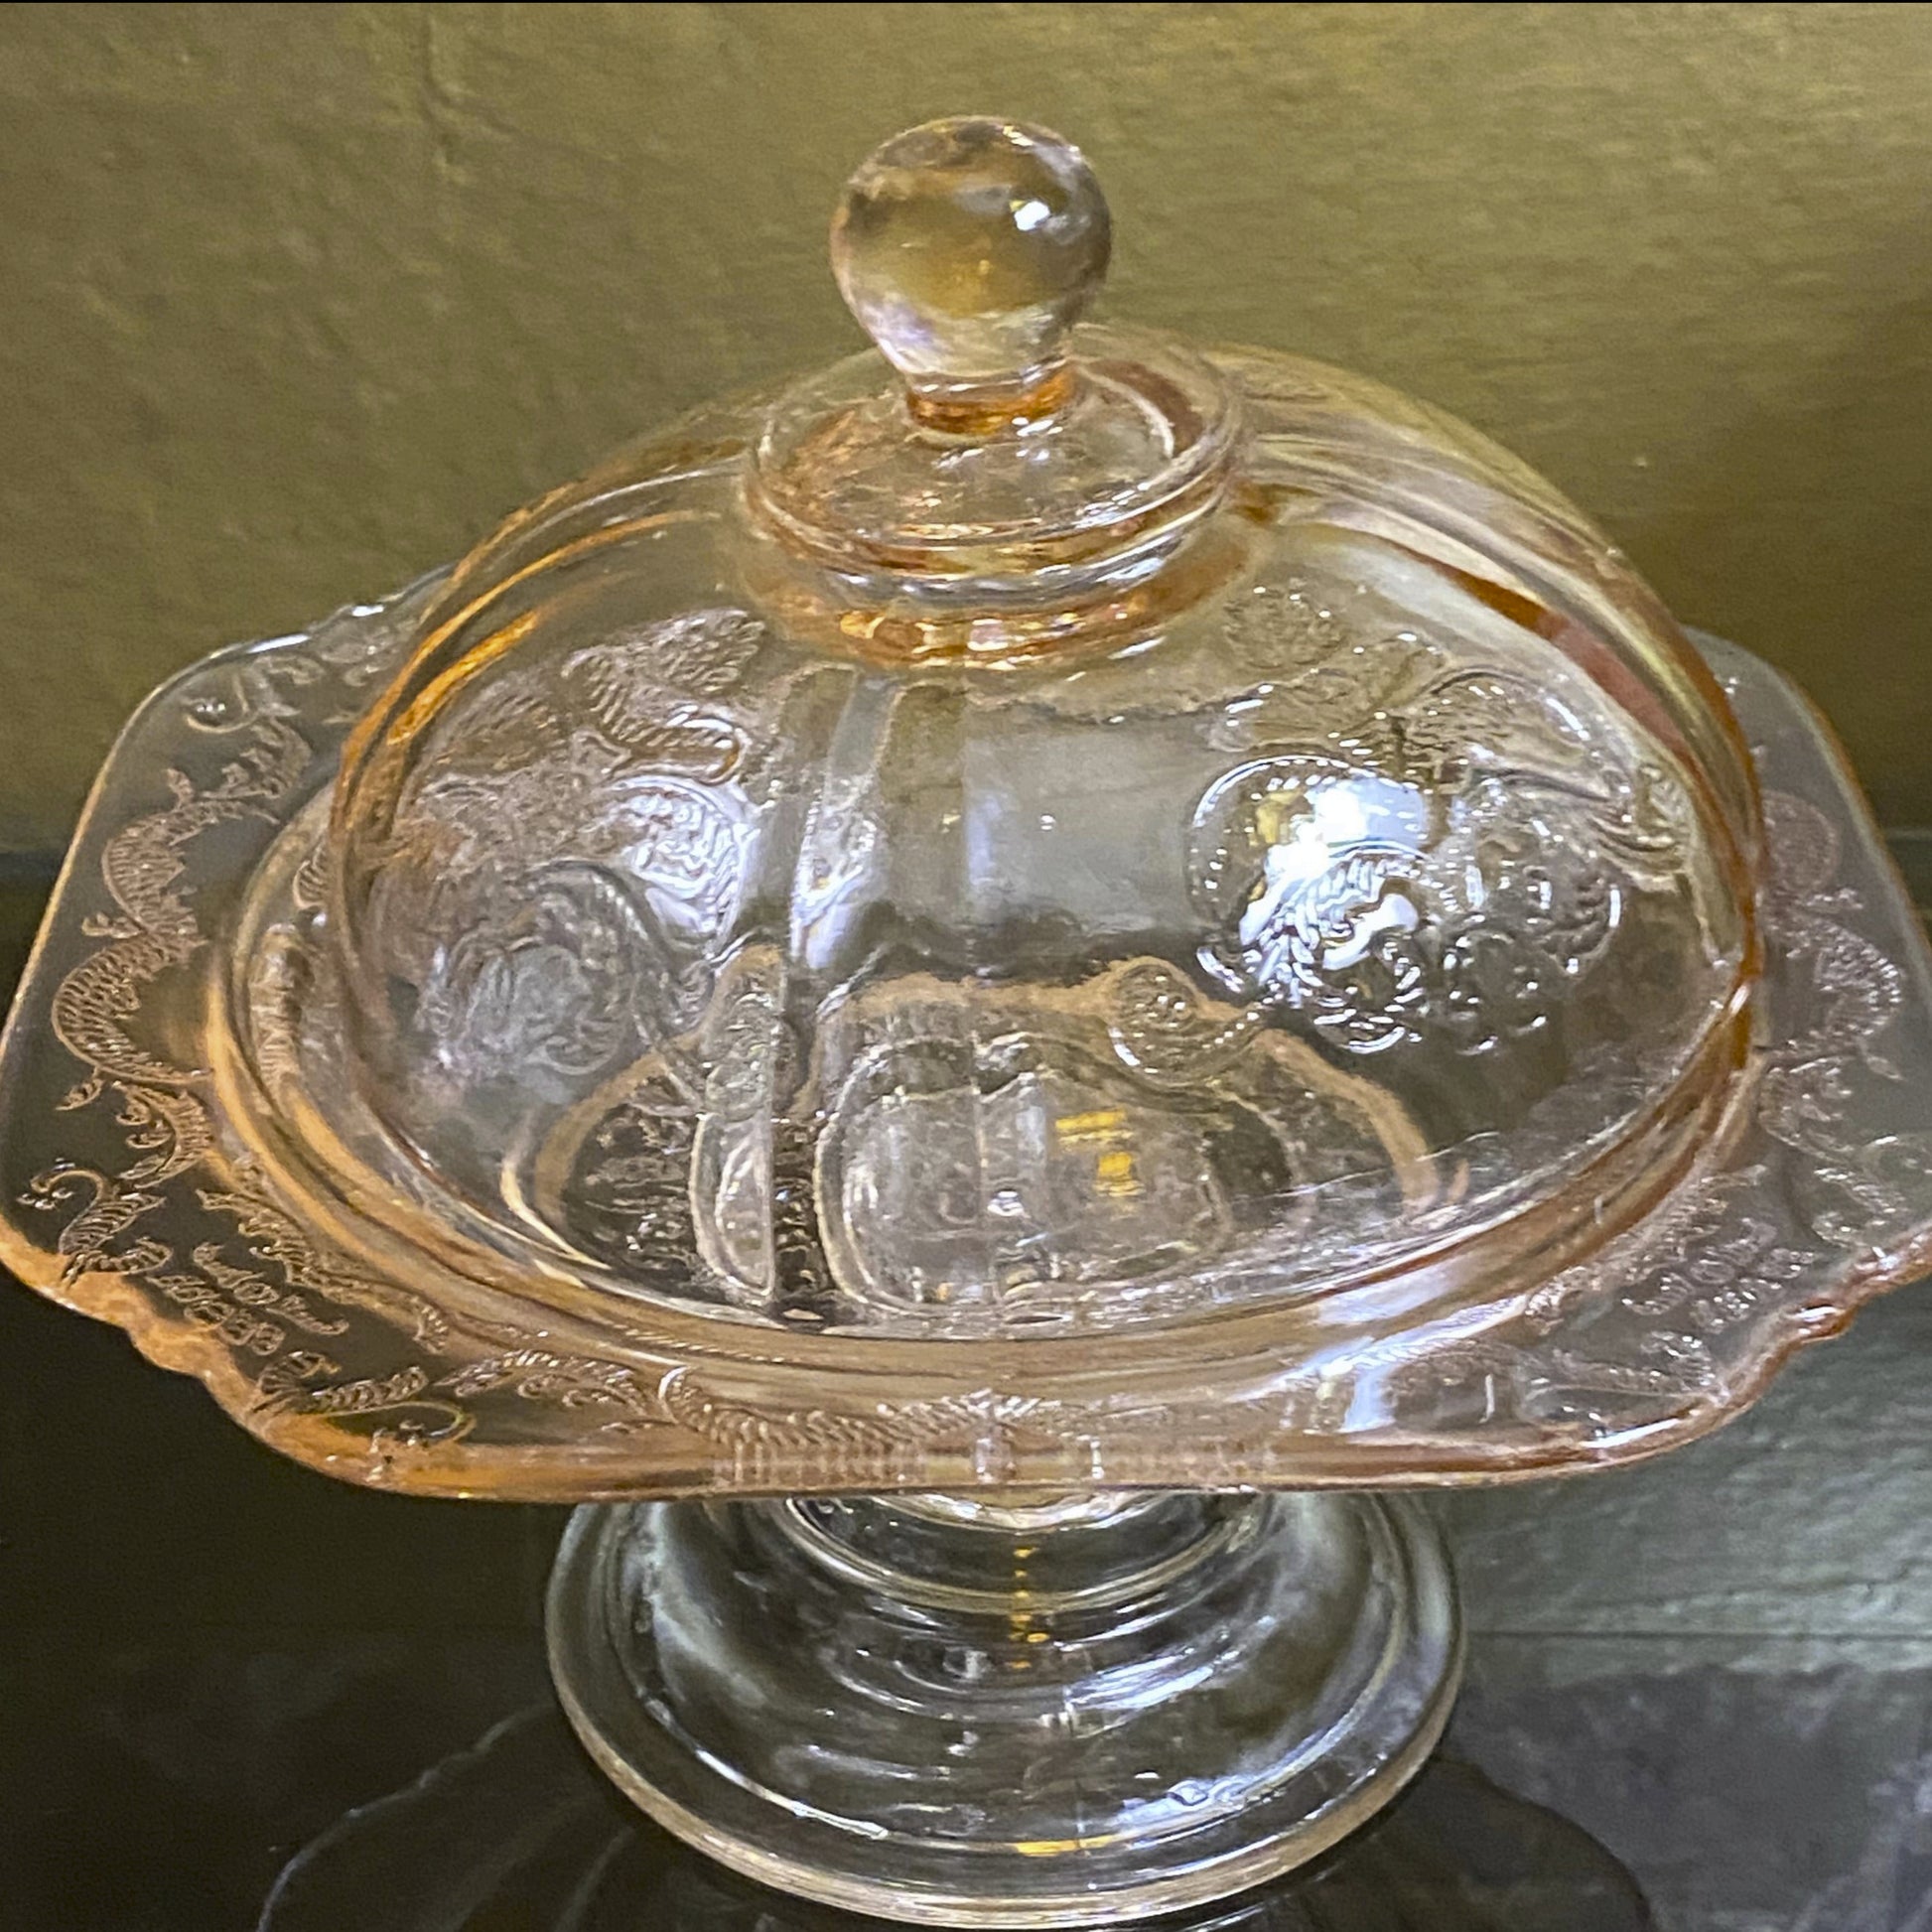 Pink Depression Glass Pedestal Dish with Lid, by Federal Glass Co.